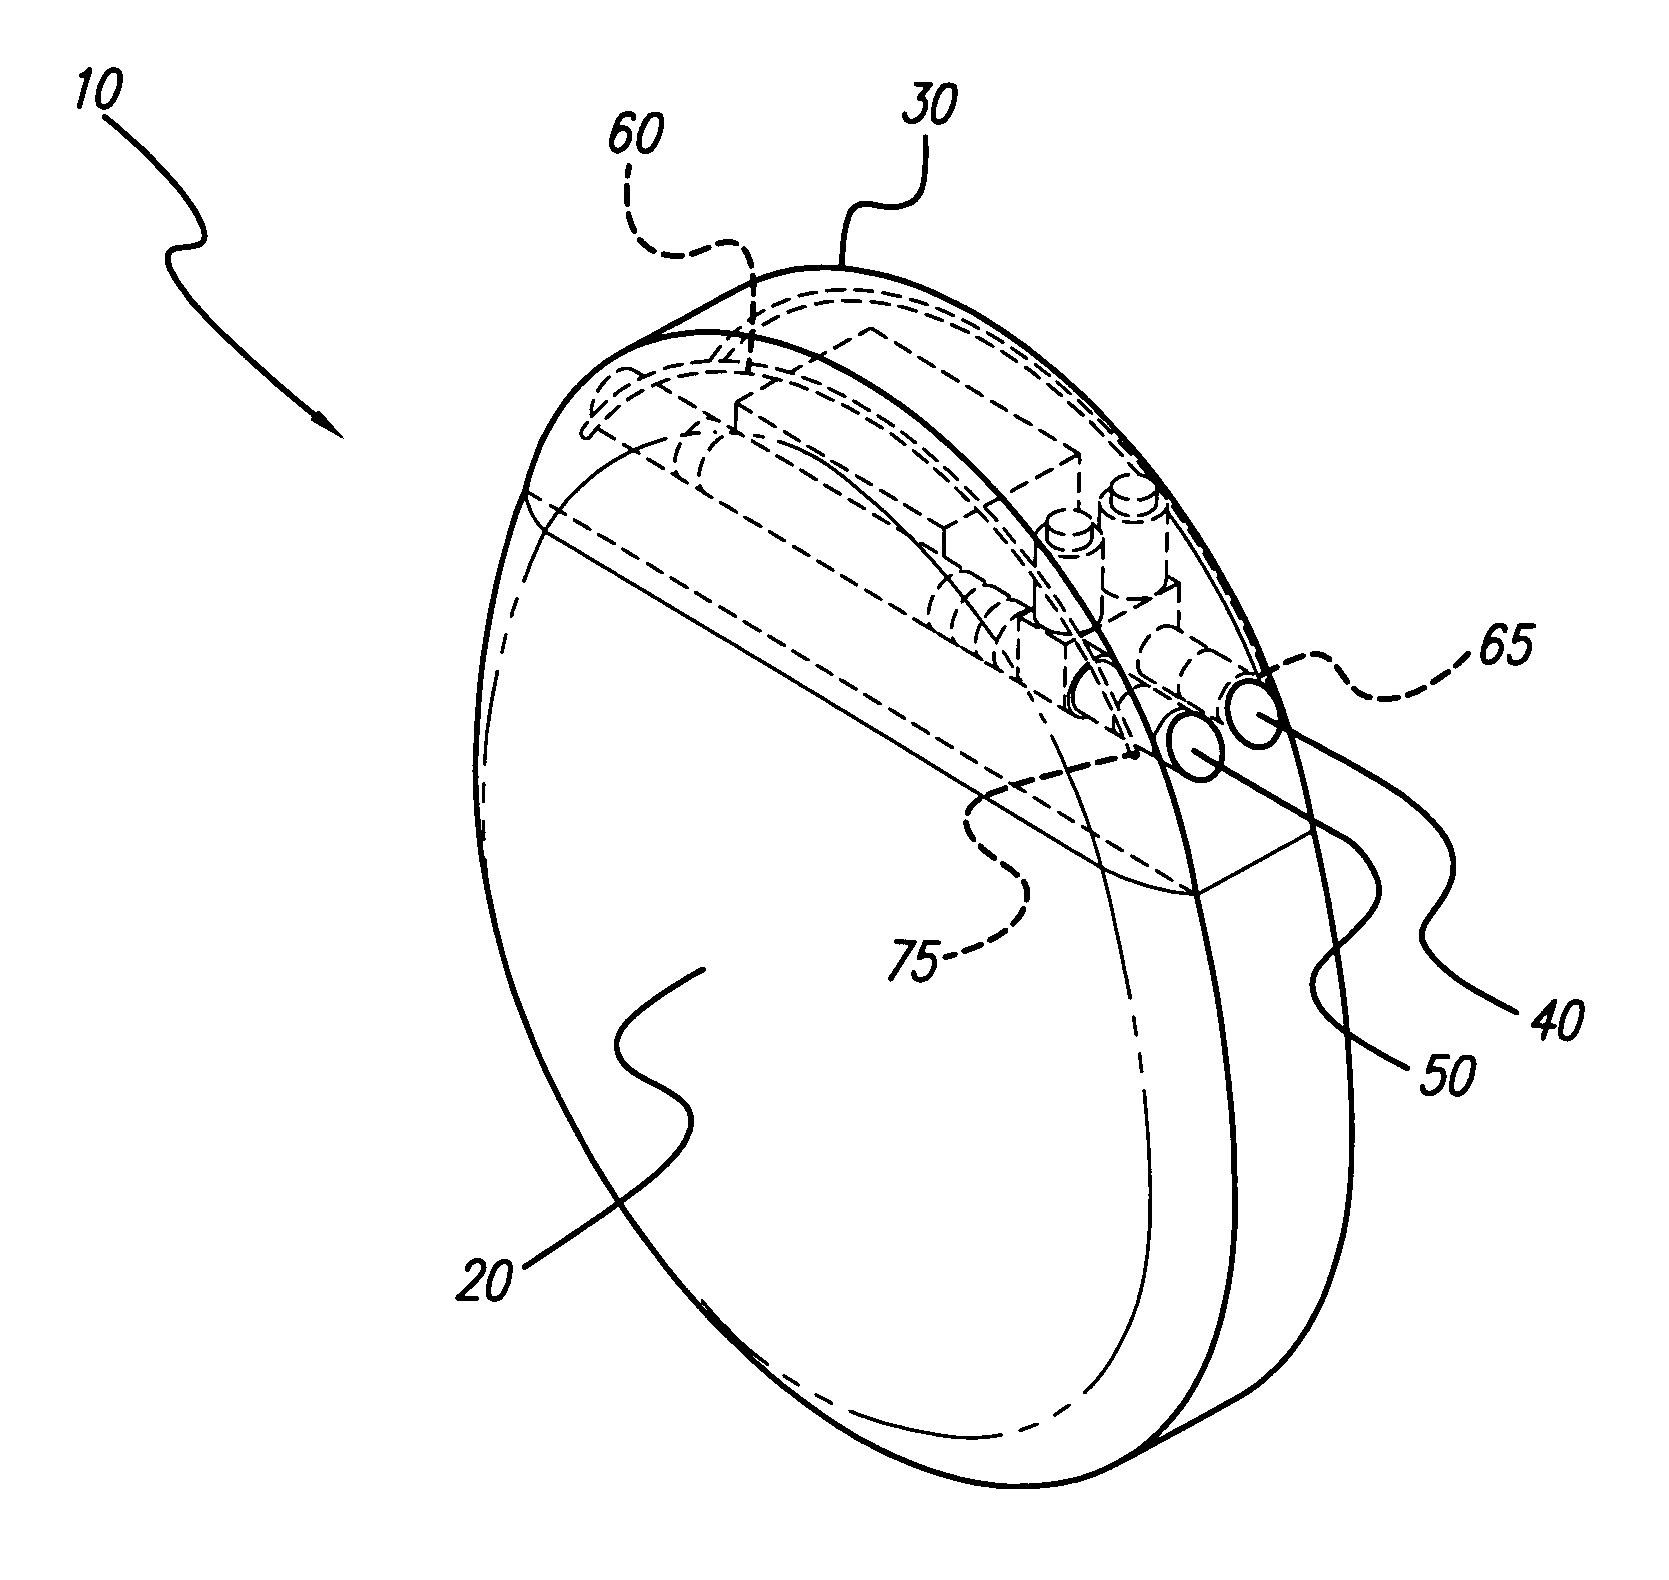 Folded monopole antenna for implanted medical device